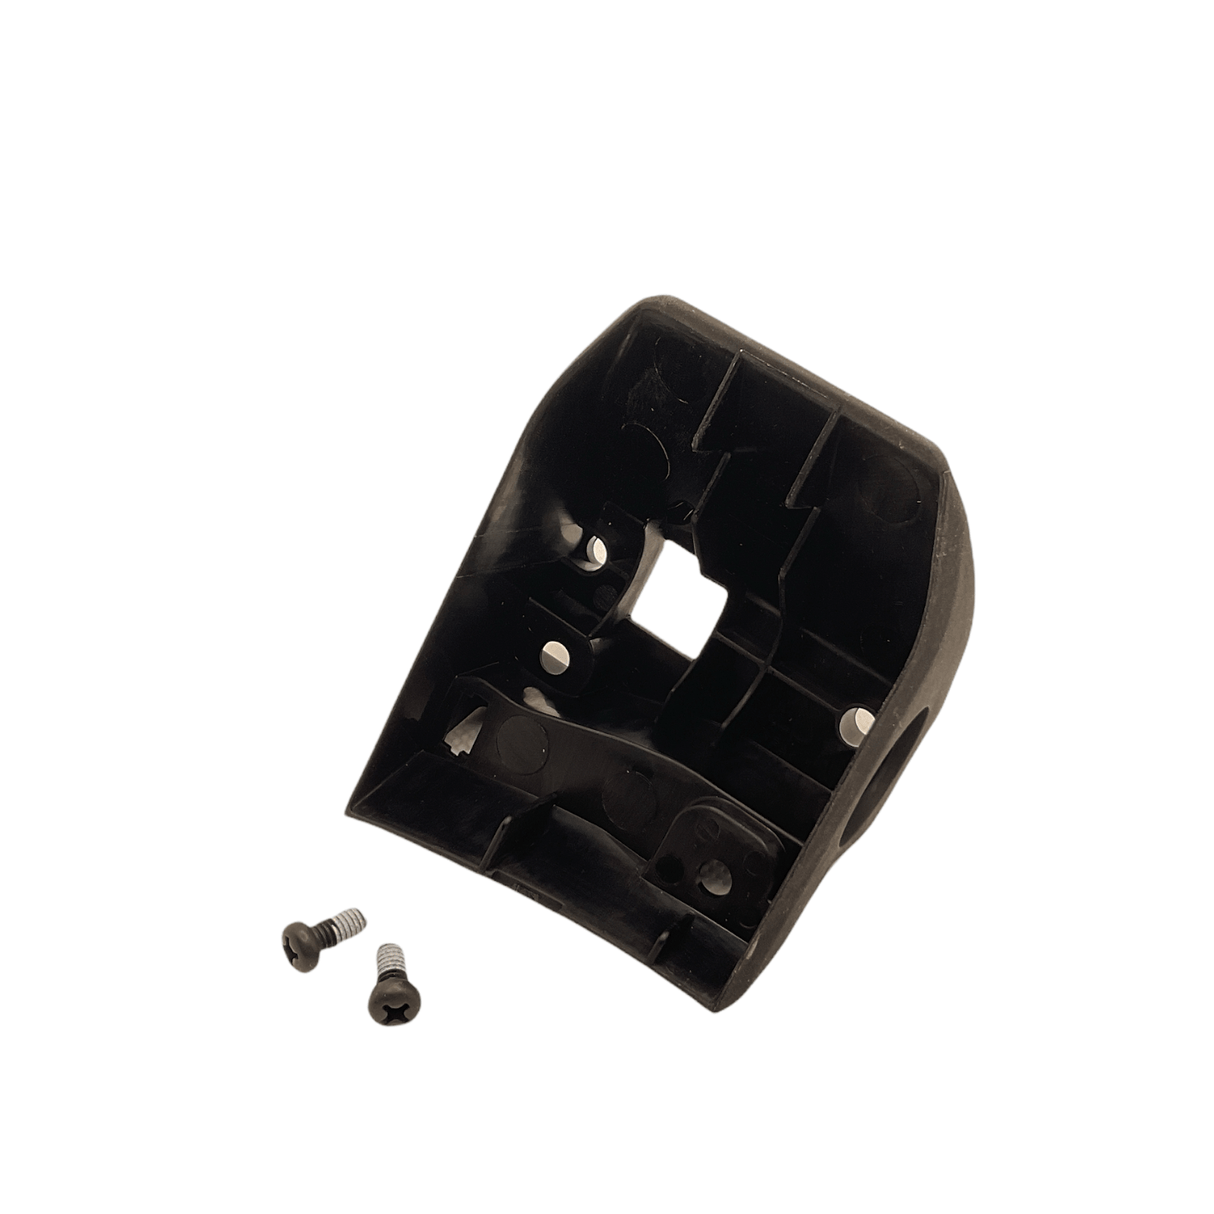 Shimano SM-BME61 Key unit cover and fixing bolts